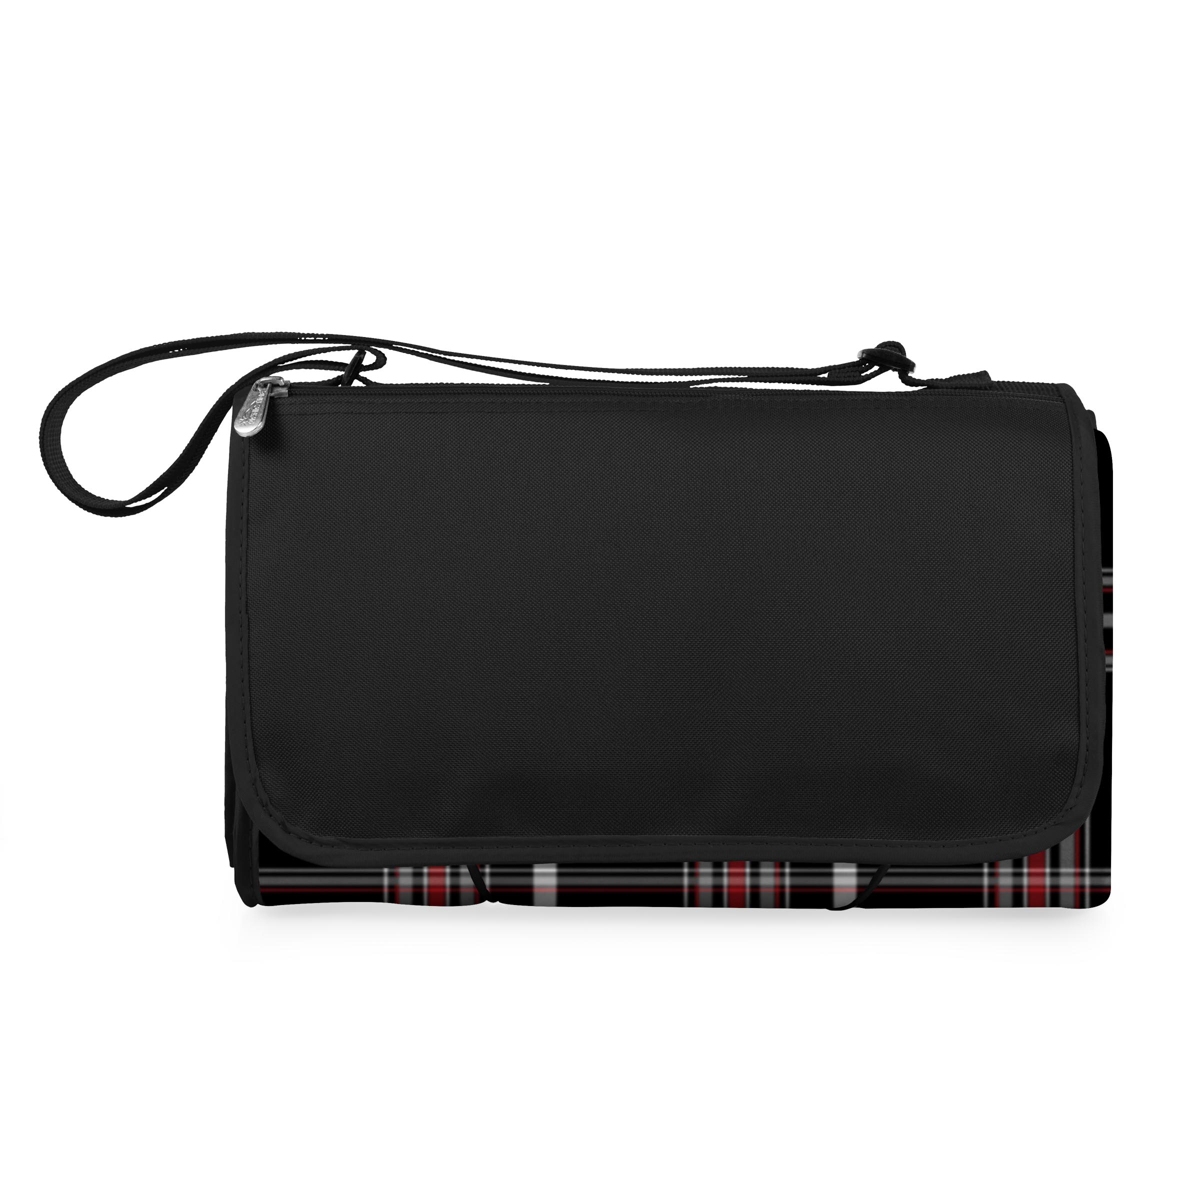 by Picnic Time Blanket Tote Xl Outdoor Picnic Blanket - Black